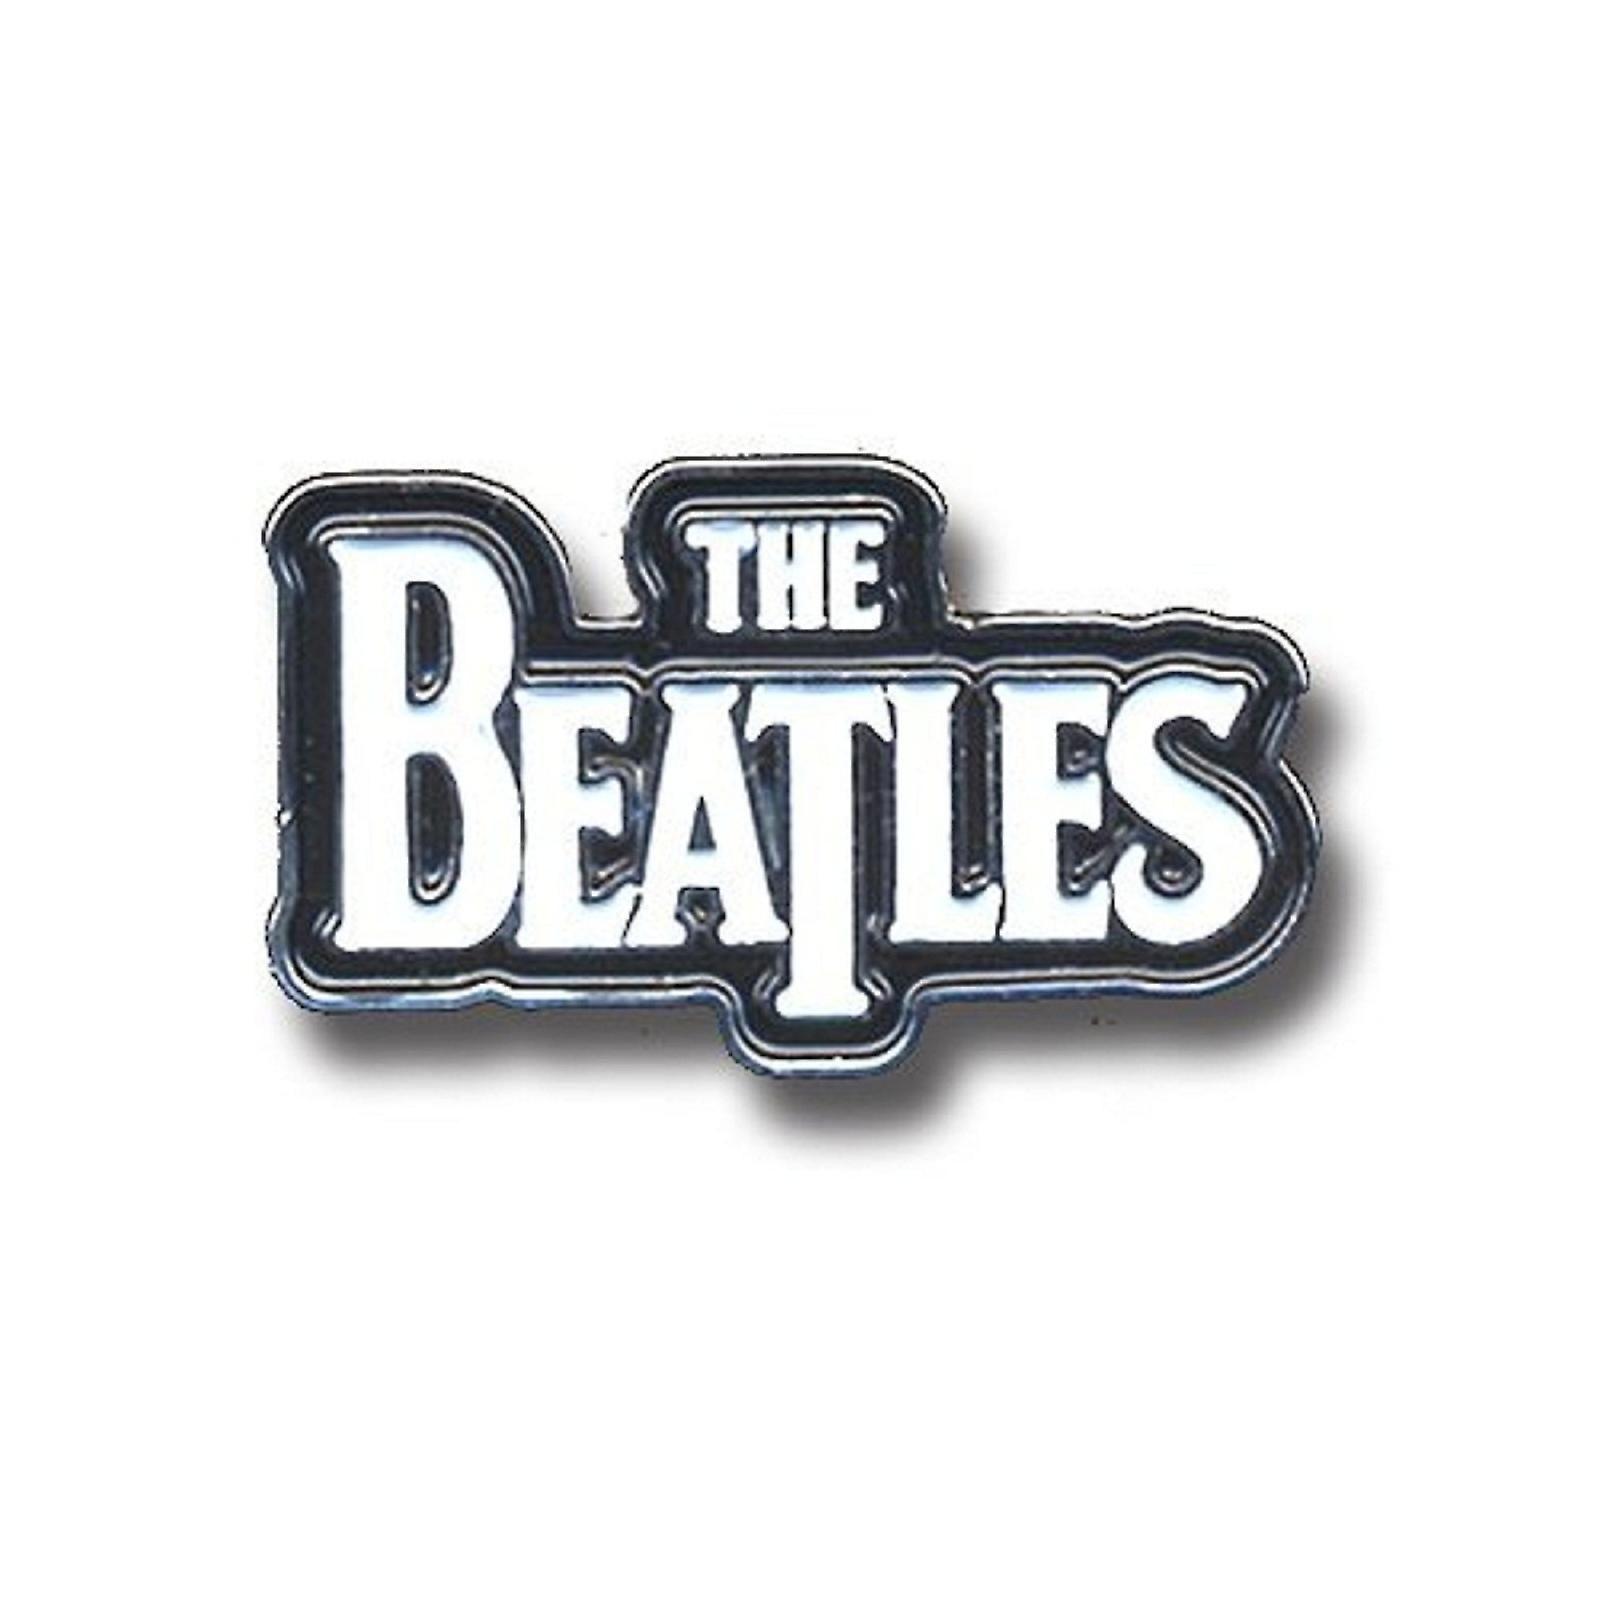 The Beatles Band Logo - The Beatles Badge white Drop T classic Band Logo new Official Metal